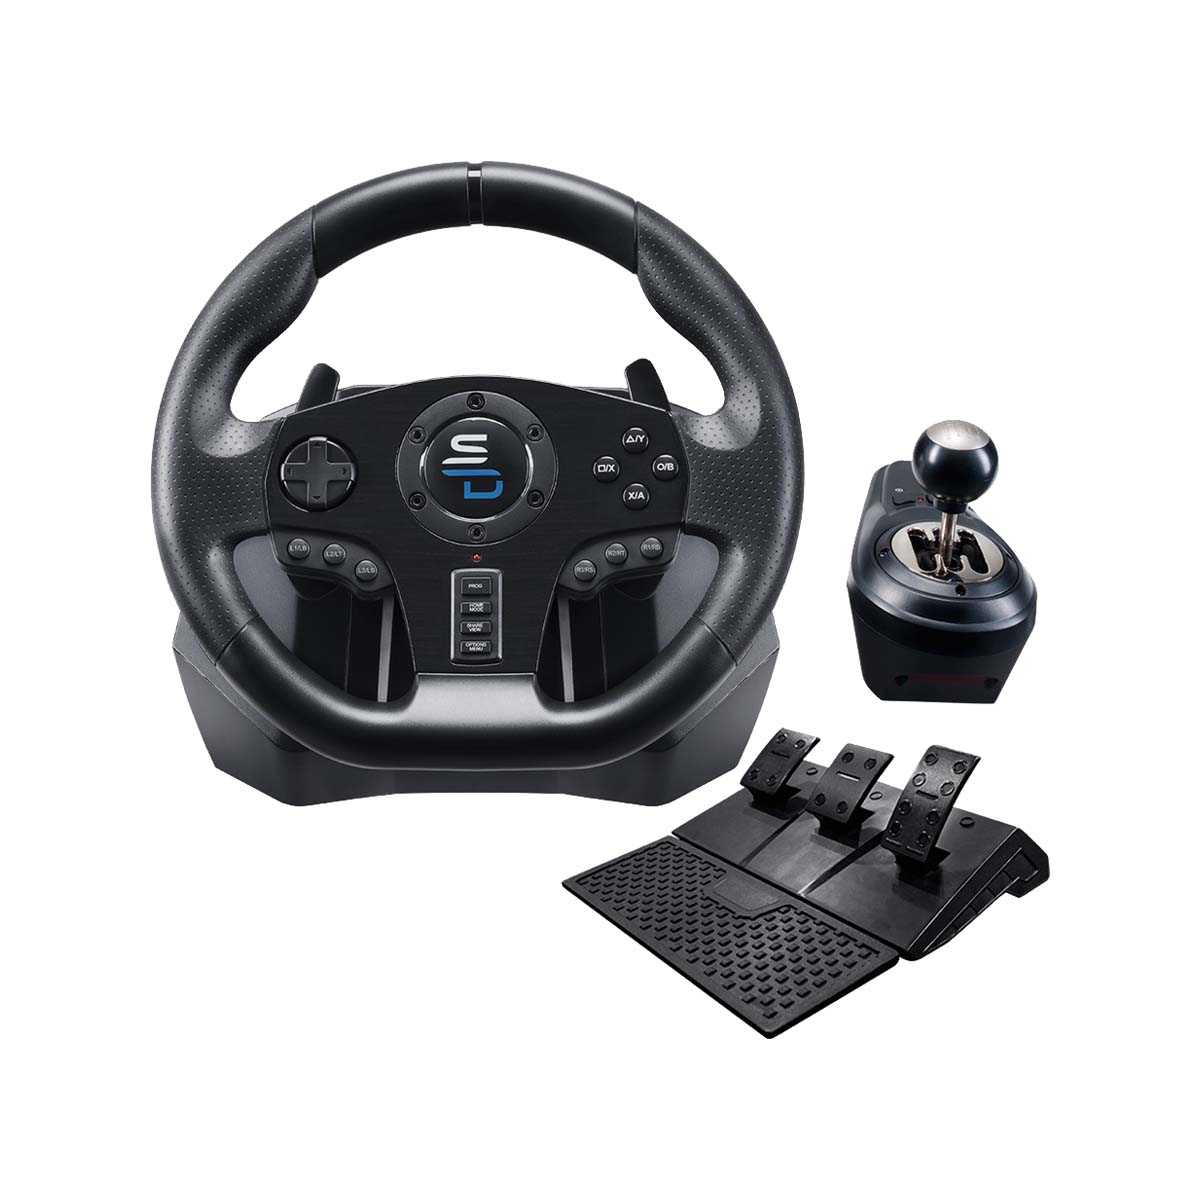 Superdrive GS 850X RACING WHEEL for PS4, Xbox Series X/S, Xbox One